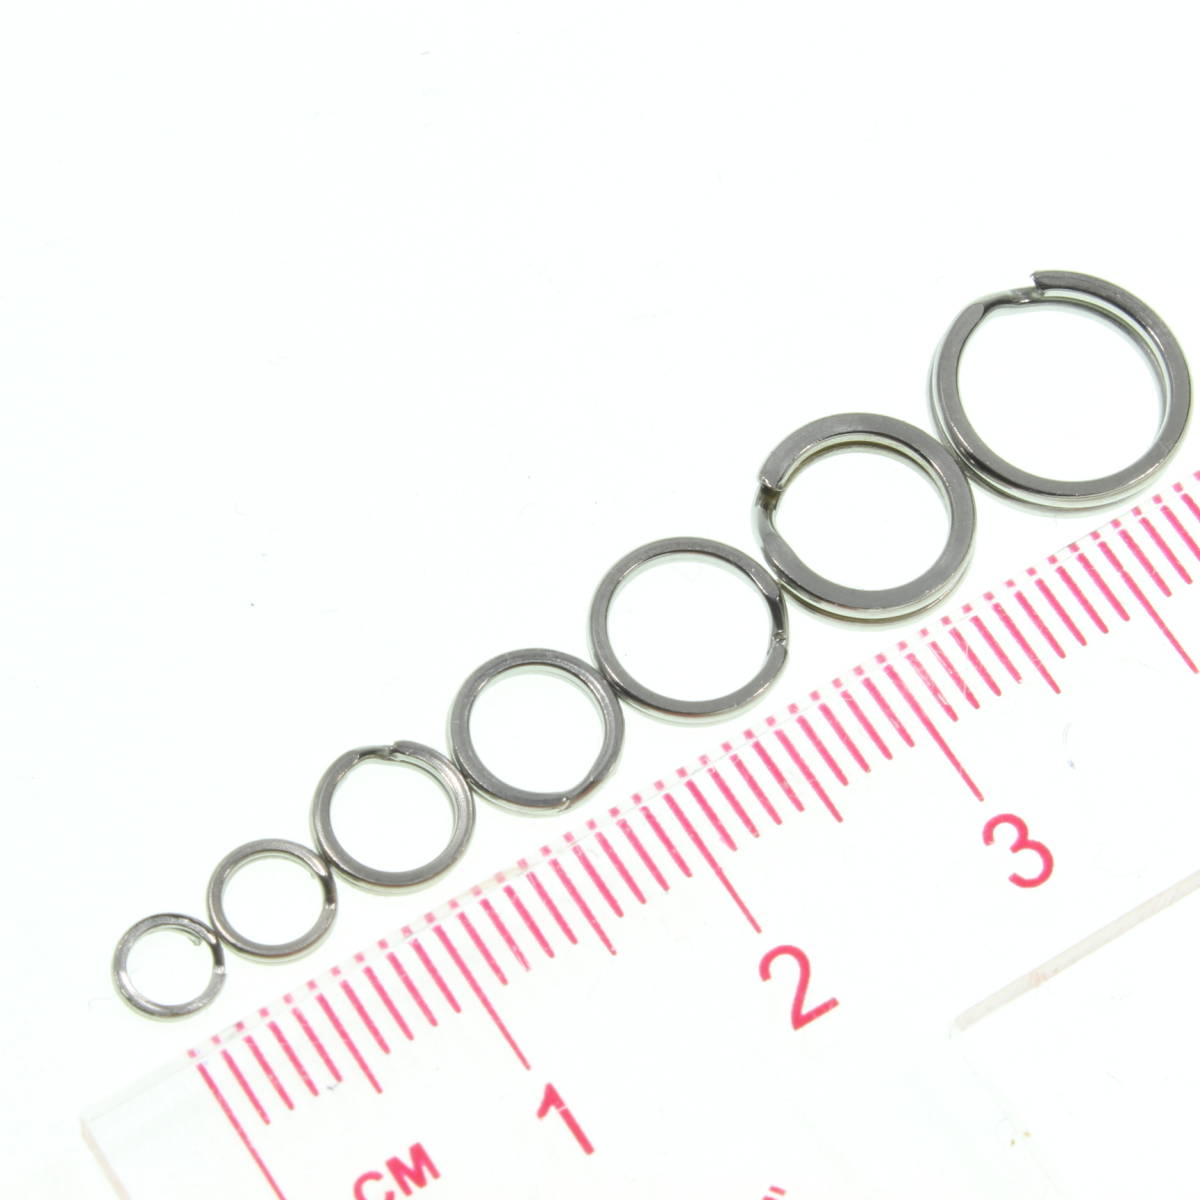 [ postage 84 jpy ] made of stainless steel flat strike . split ring #3 outer diameter 6mm 50 piece set lure. hook to the exchange!